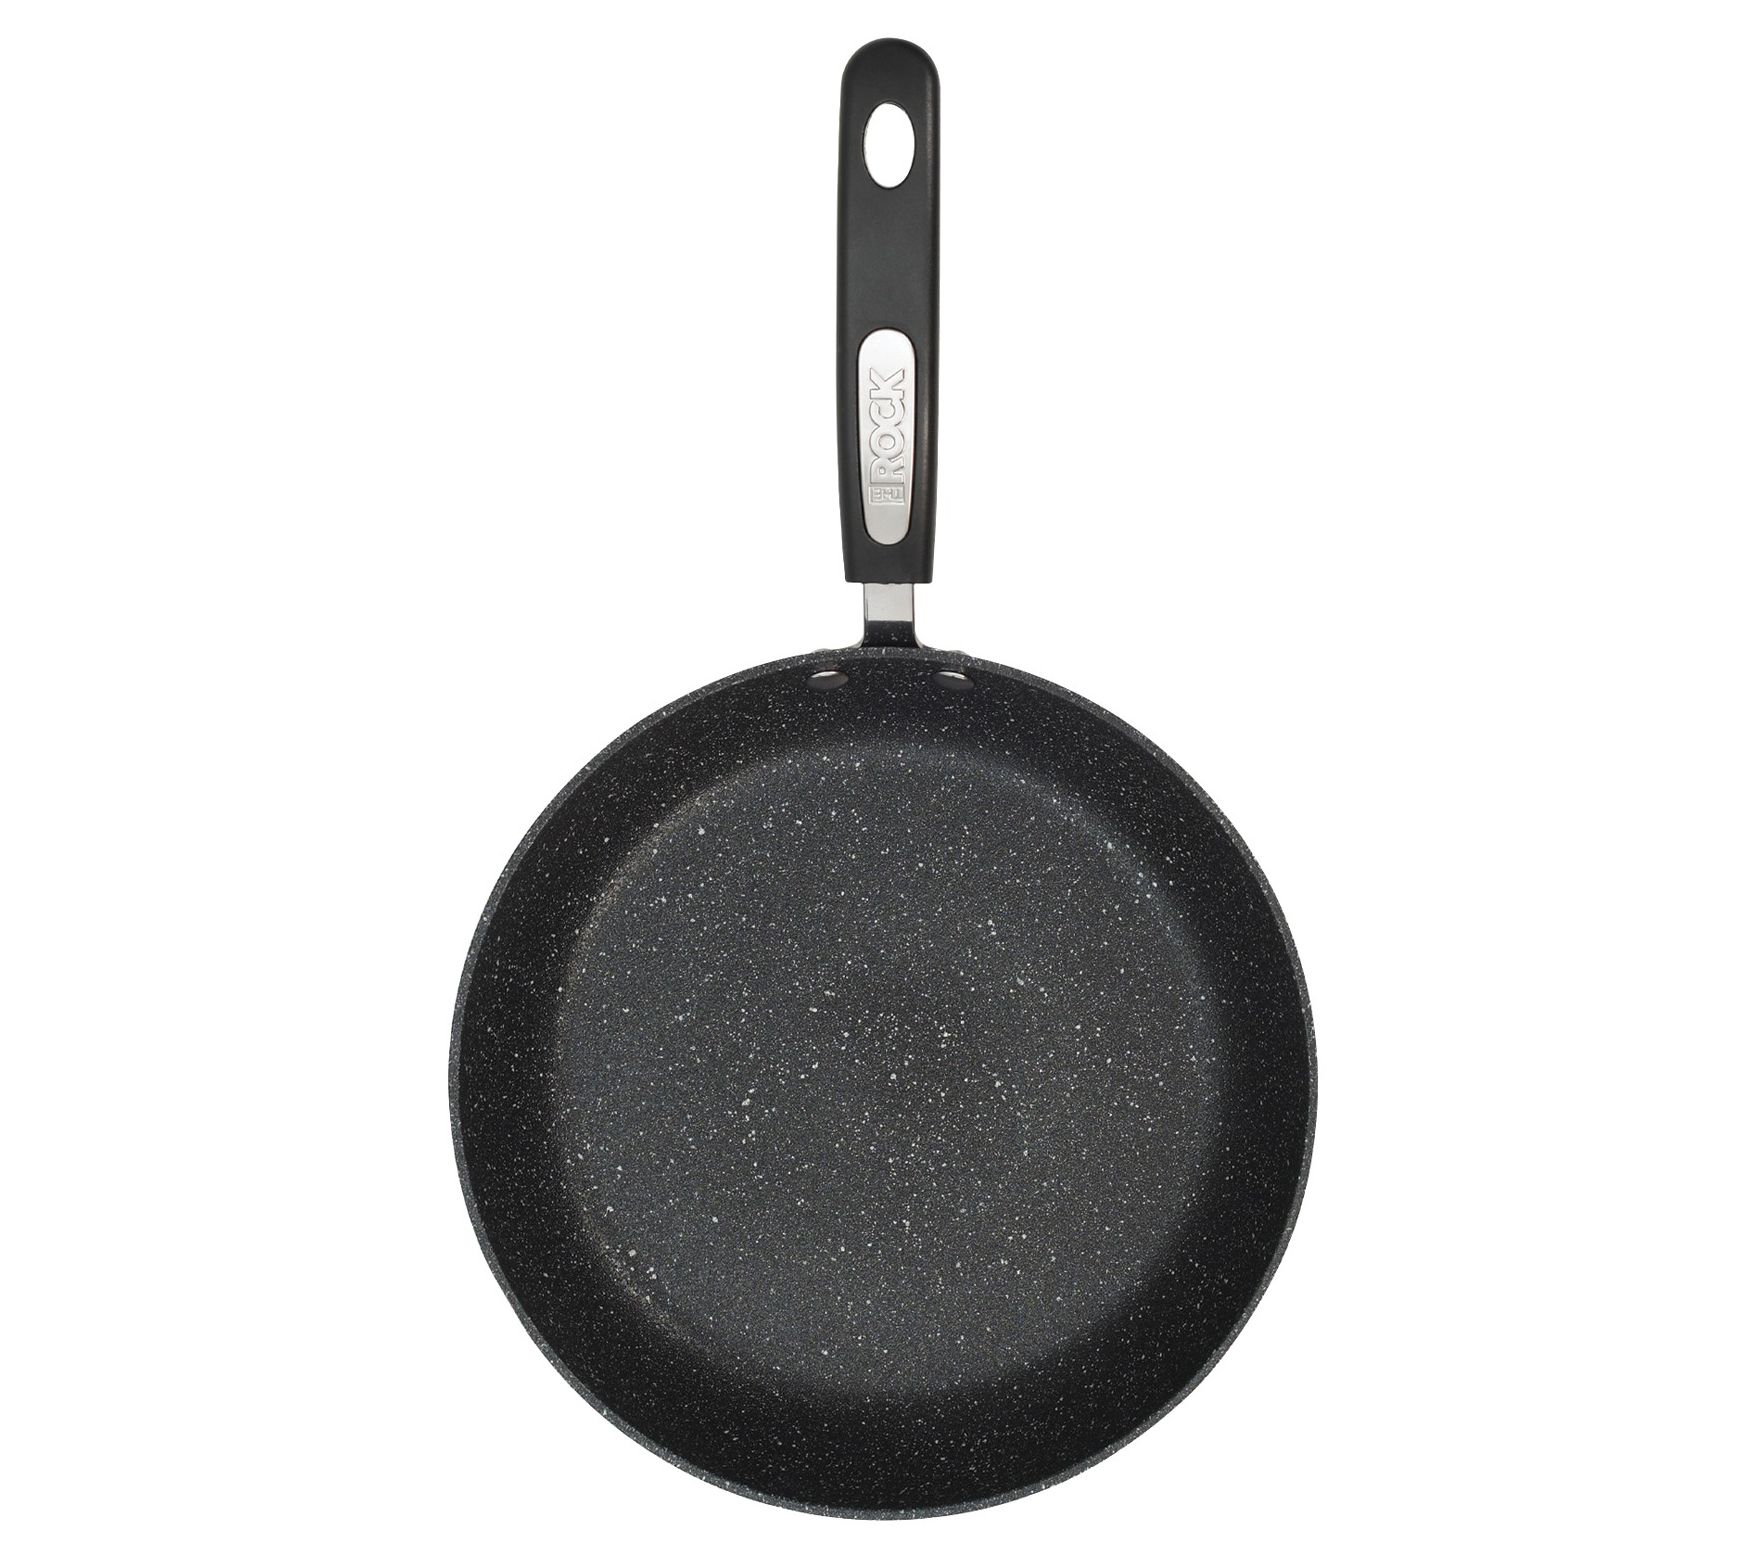 Masterchef Frying Pan with Soft-Touch Bakelite Handle (8-inch)